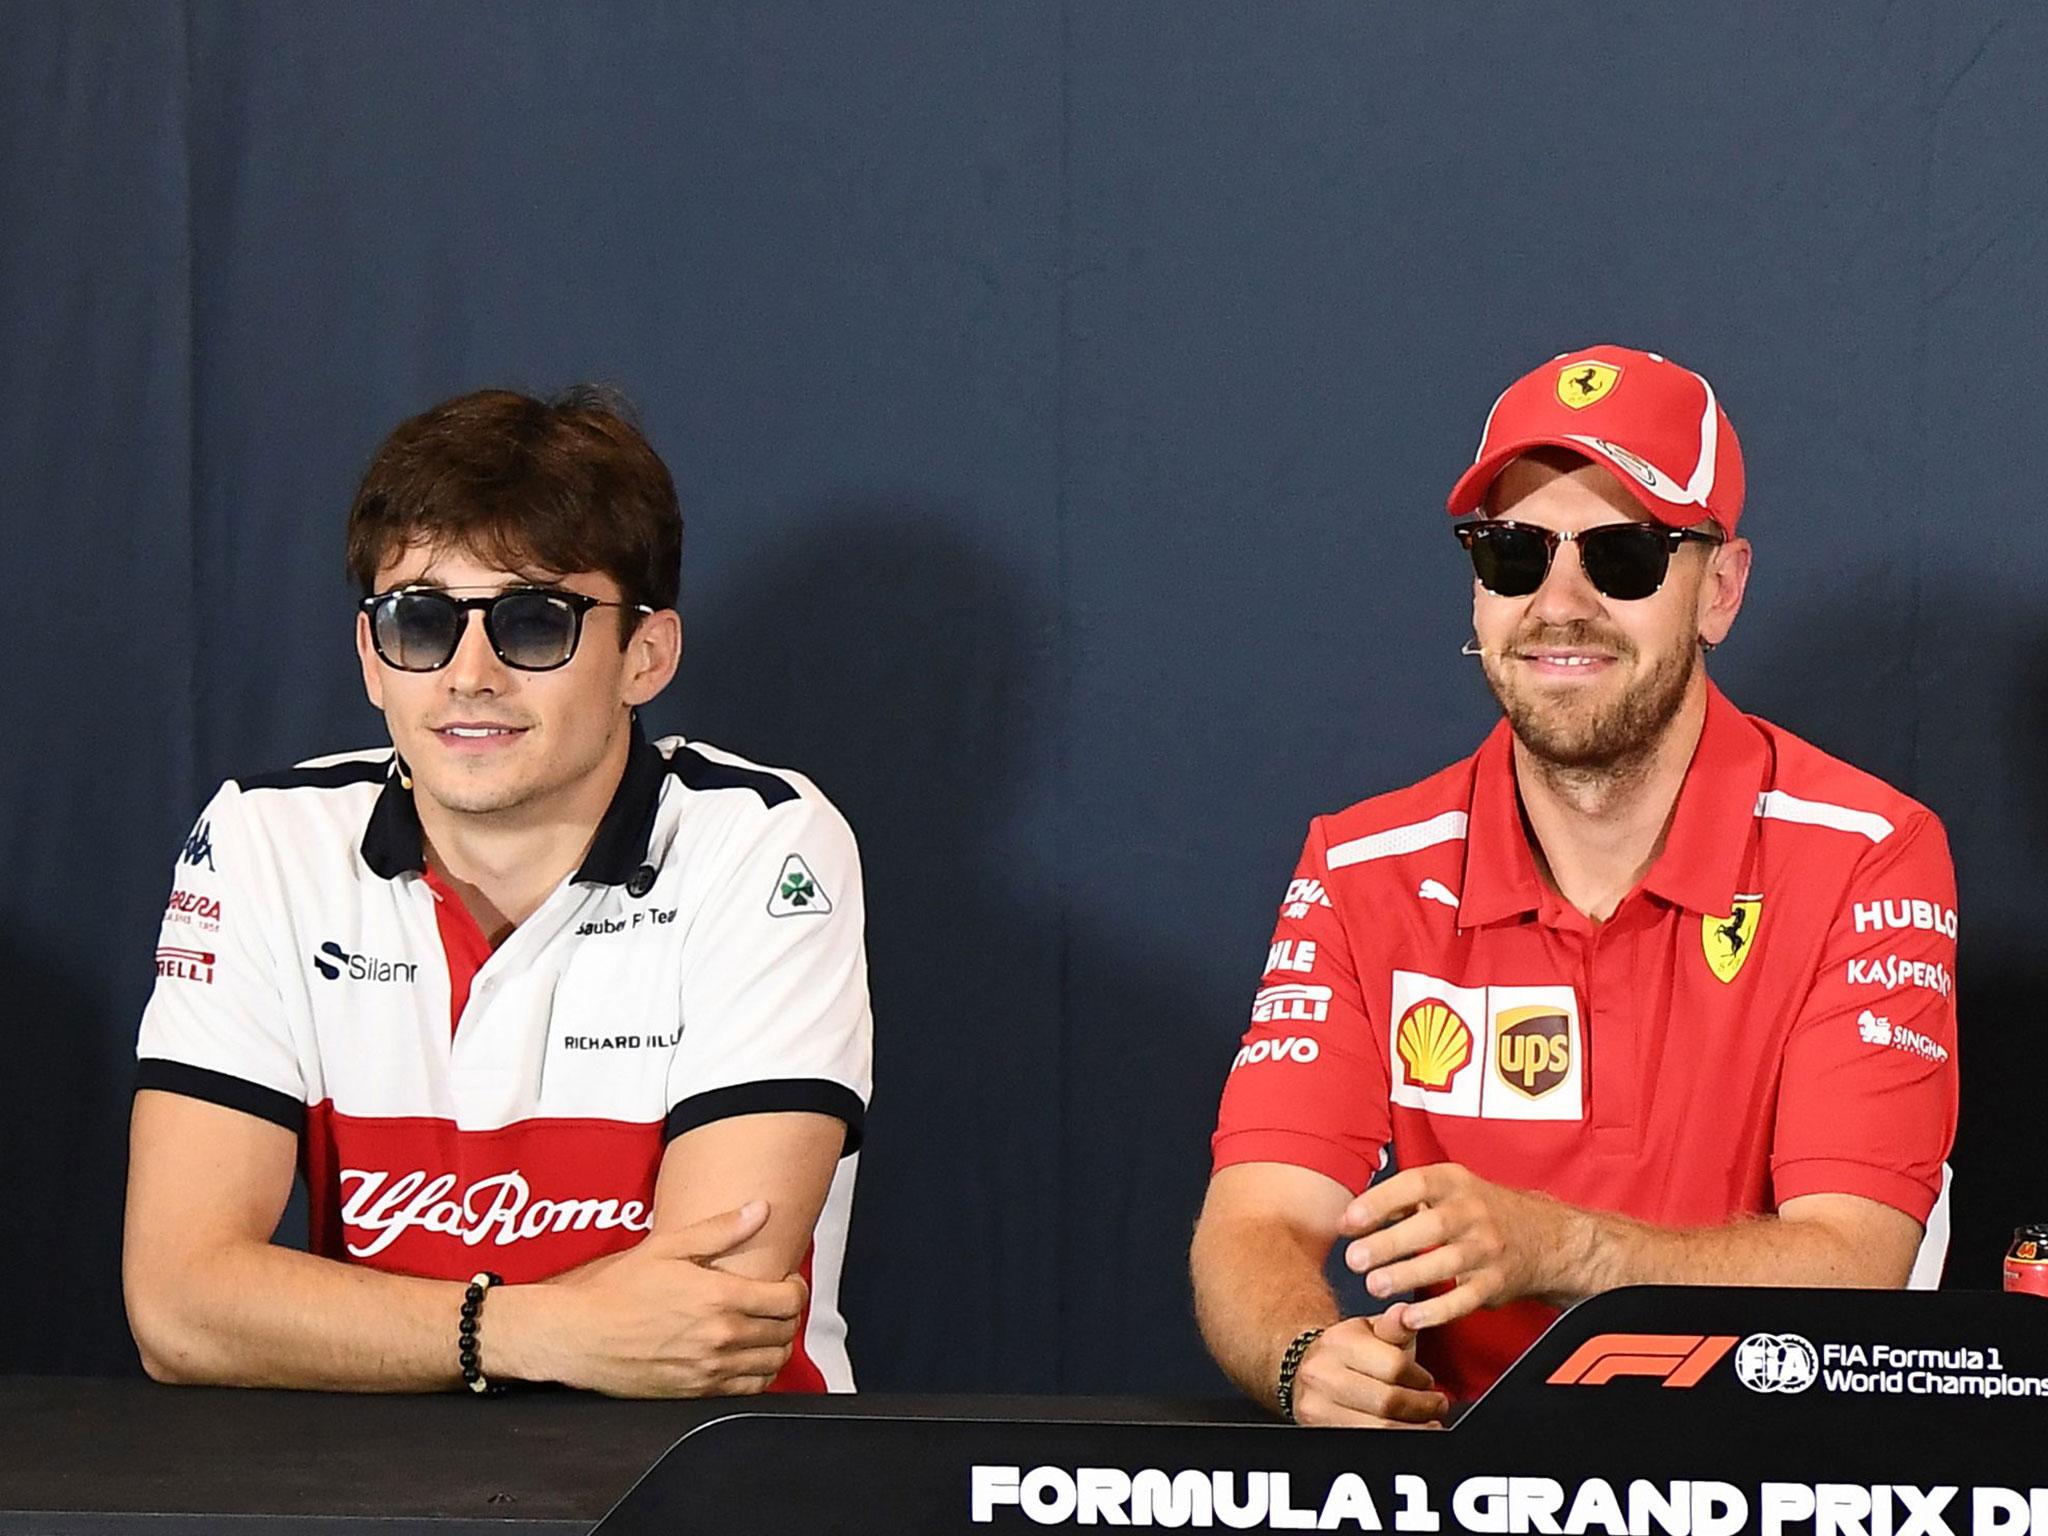 Charles Leclerc could pose a serious threat to Vettel next season